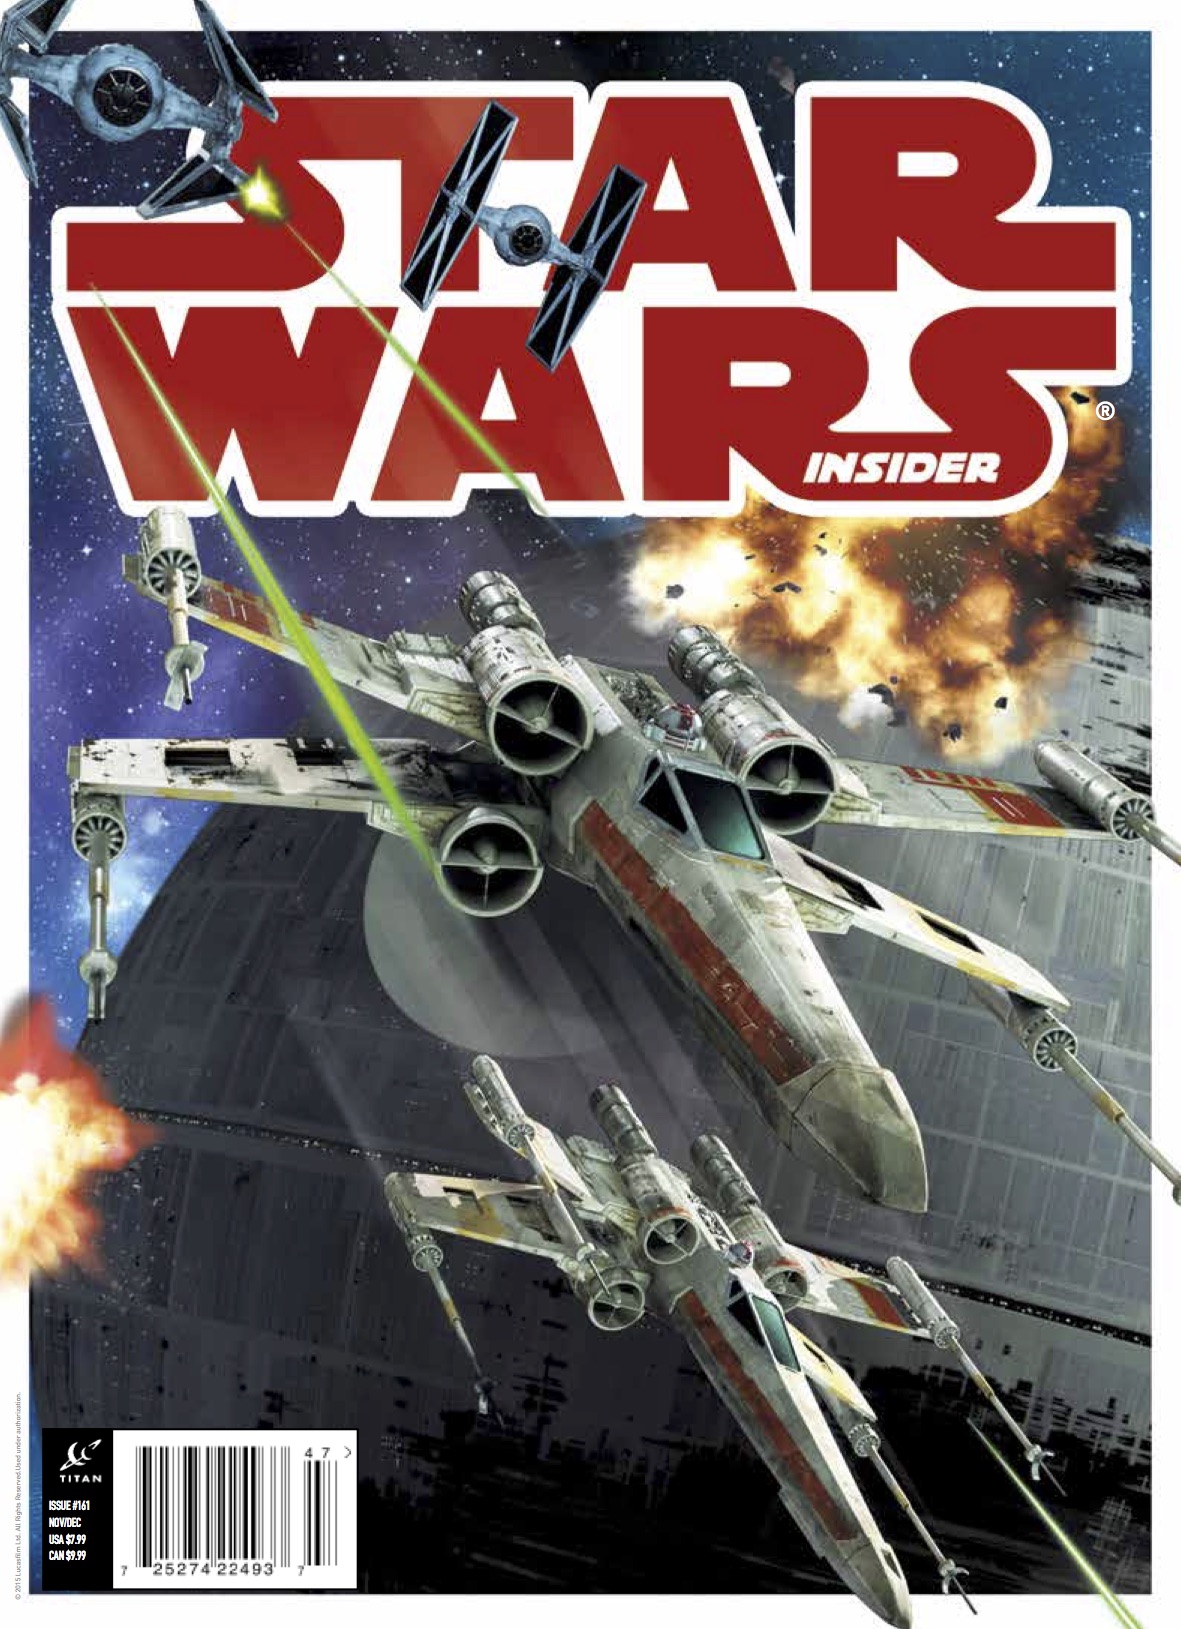 Star Wars Insider #161 (Comic Store Cover)